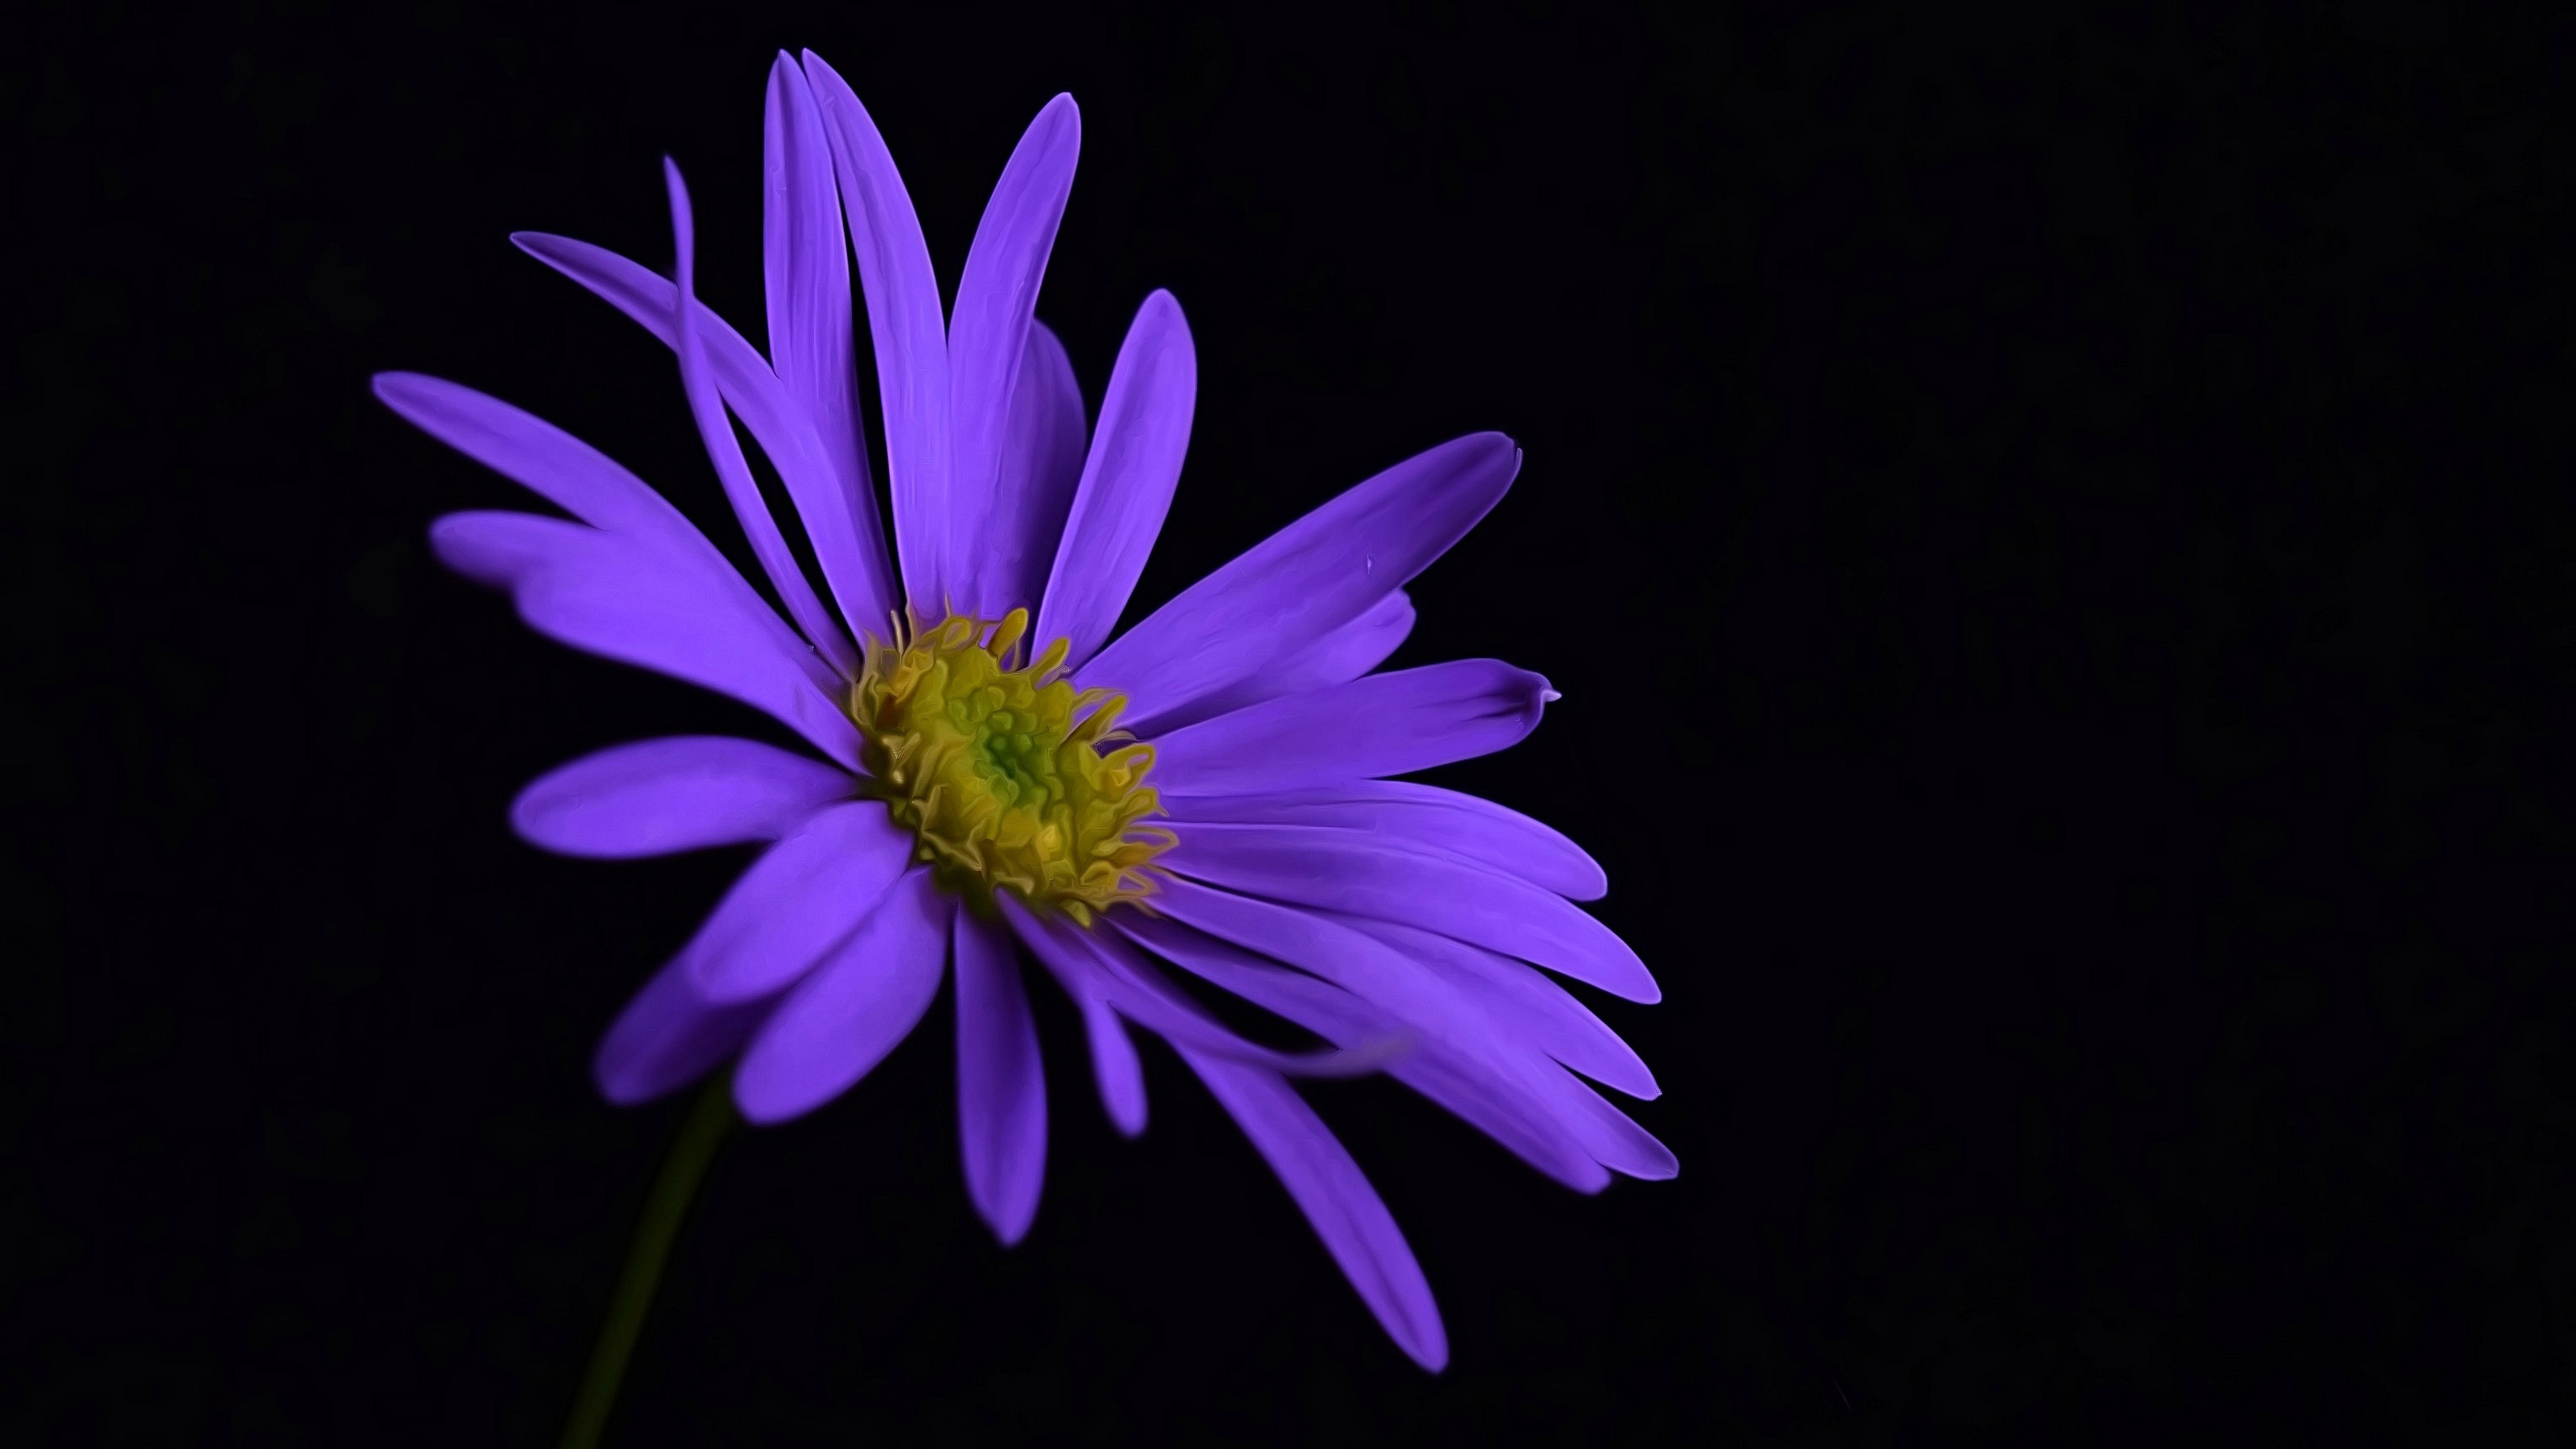 Purple Flower Blossom, HD Flowers, 4k Wallpapers, Images ...